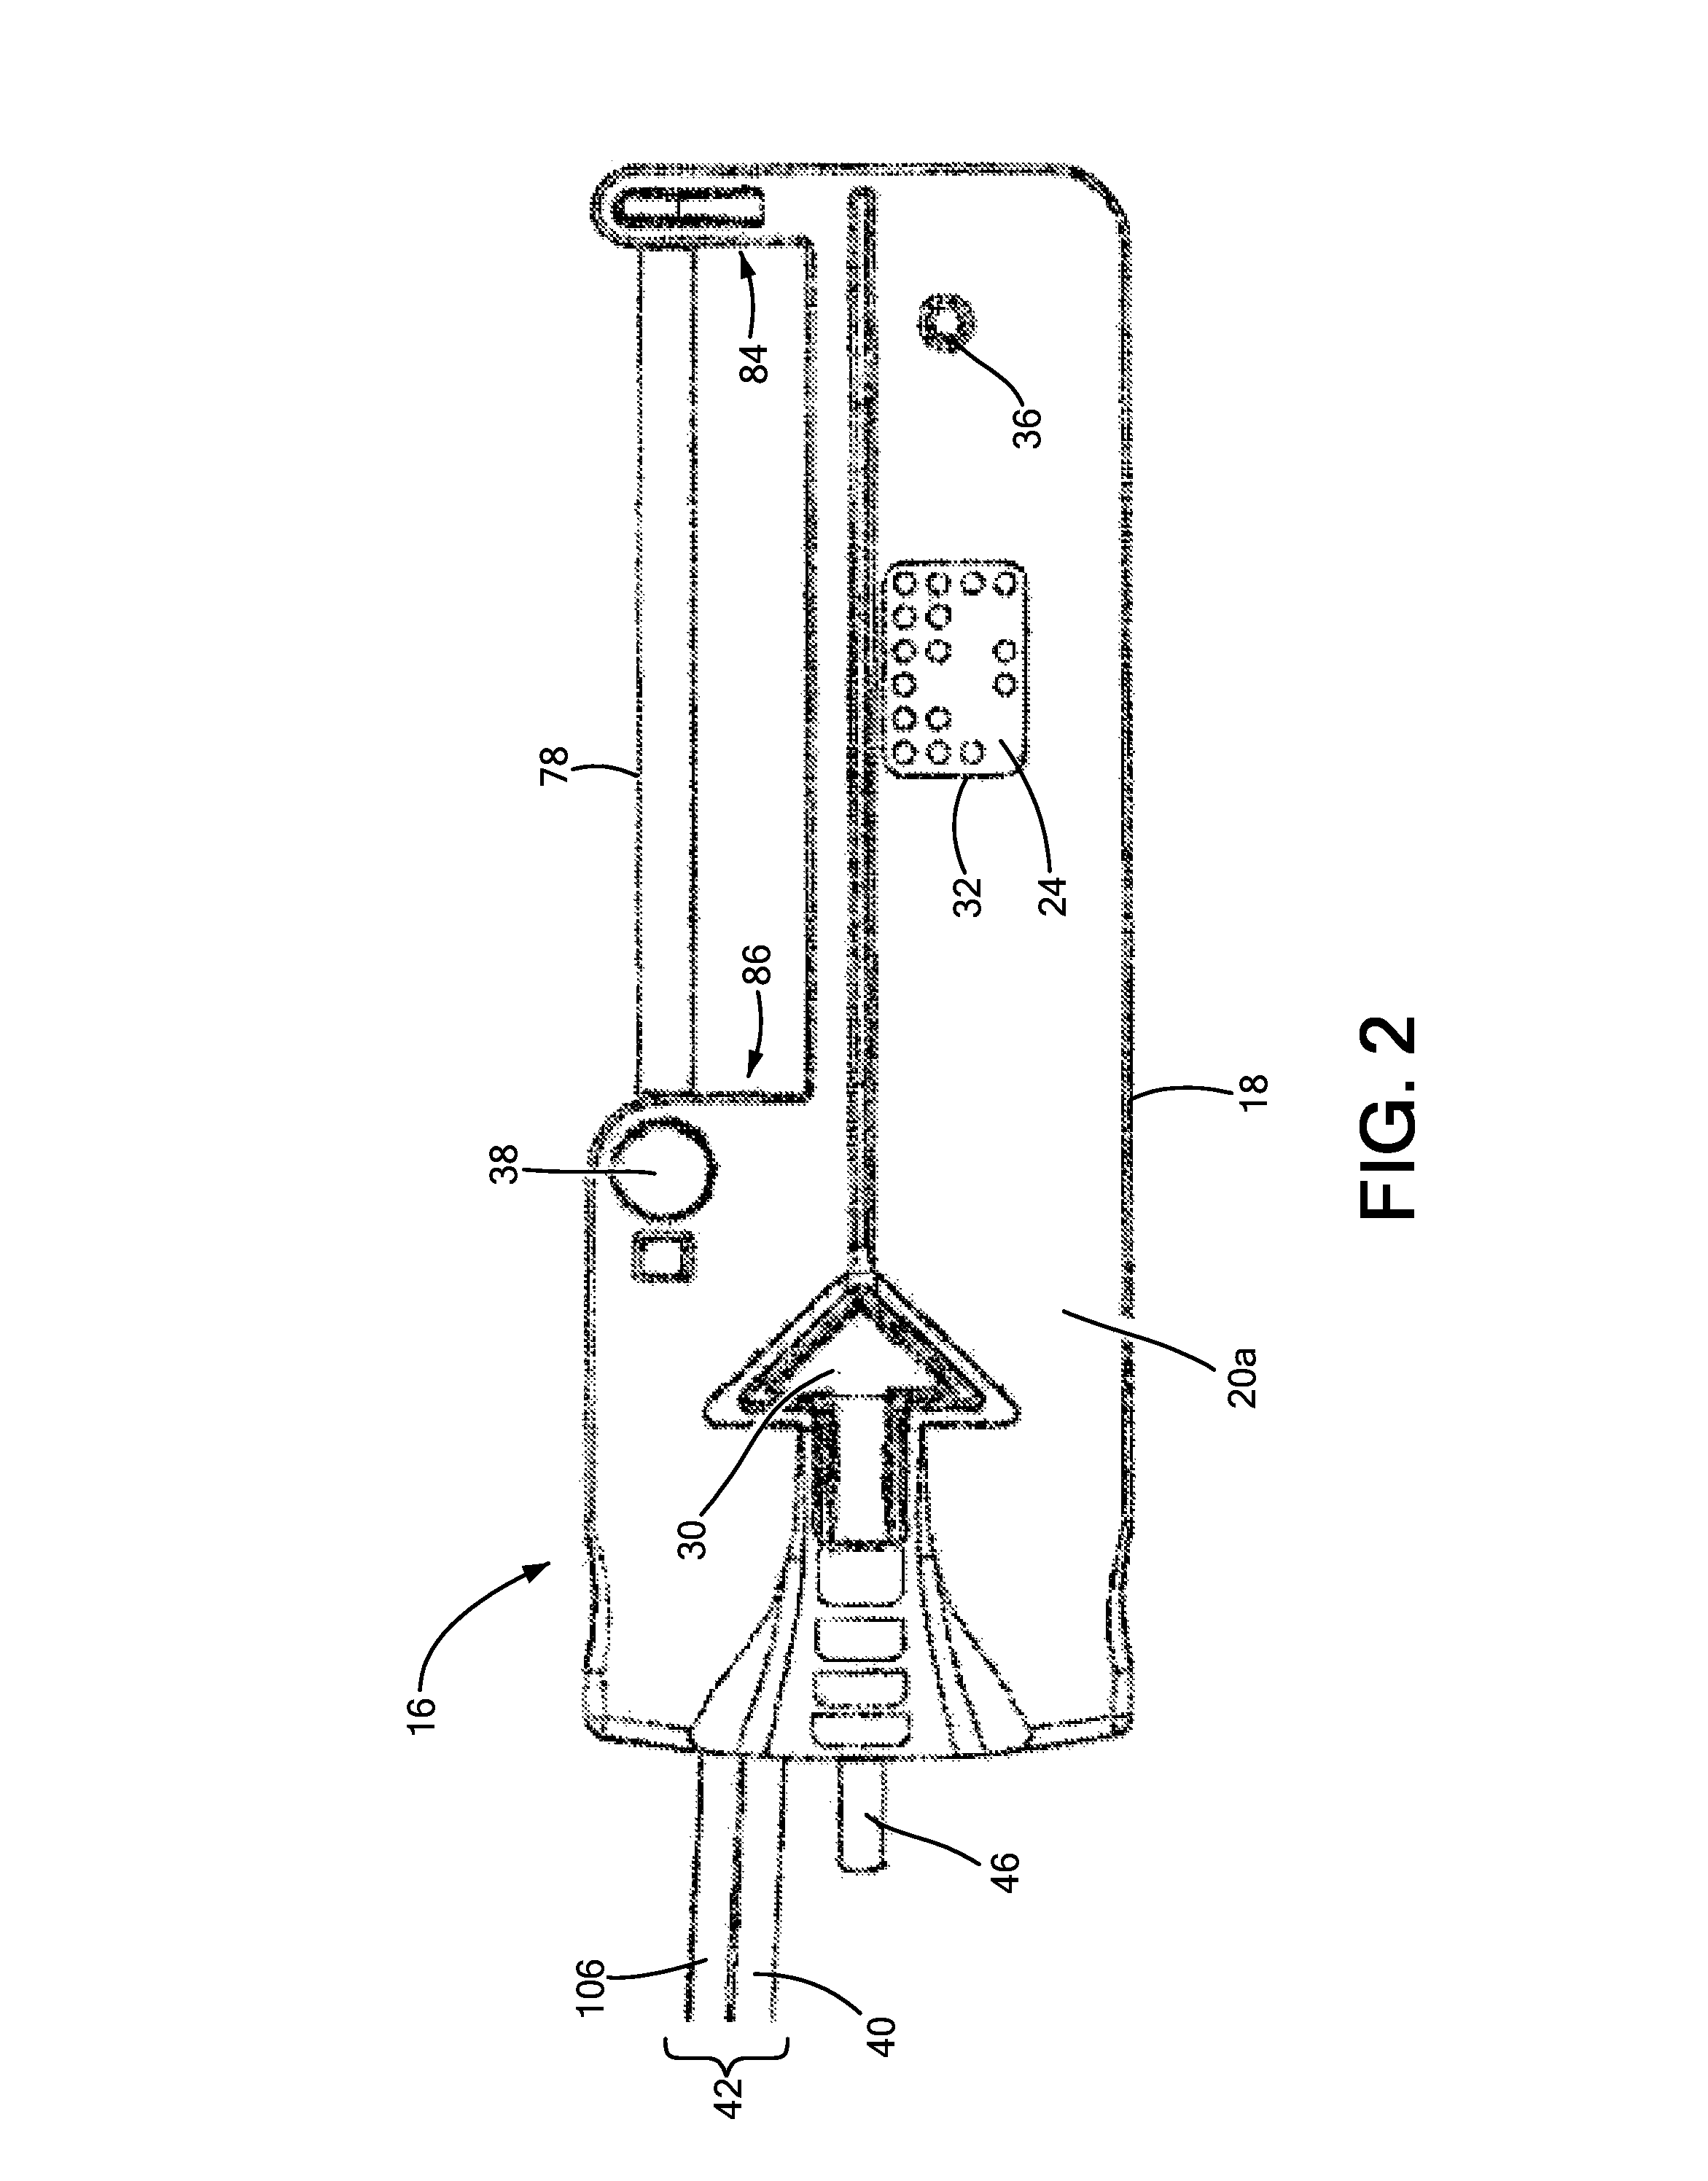 Electrosurgical devices, electrosurgical unit and methods of use thereof